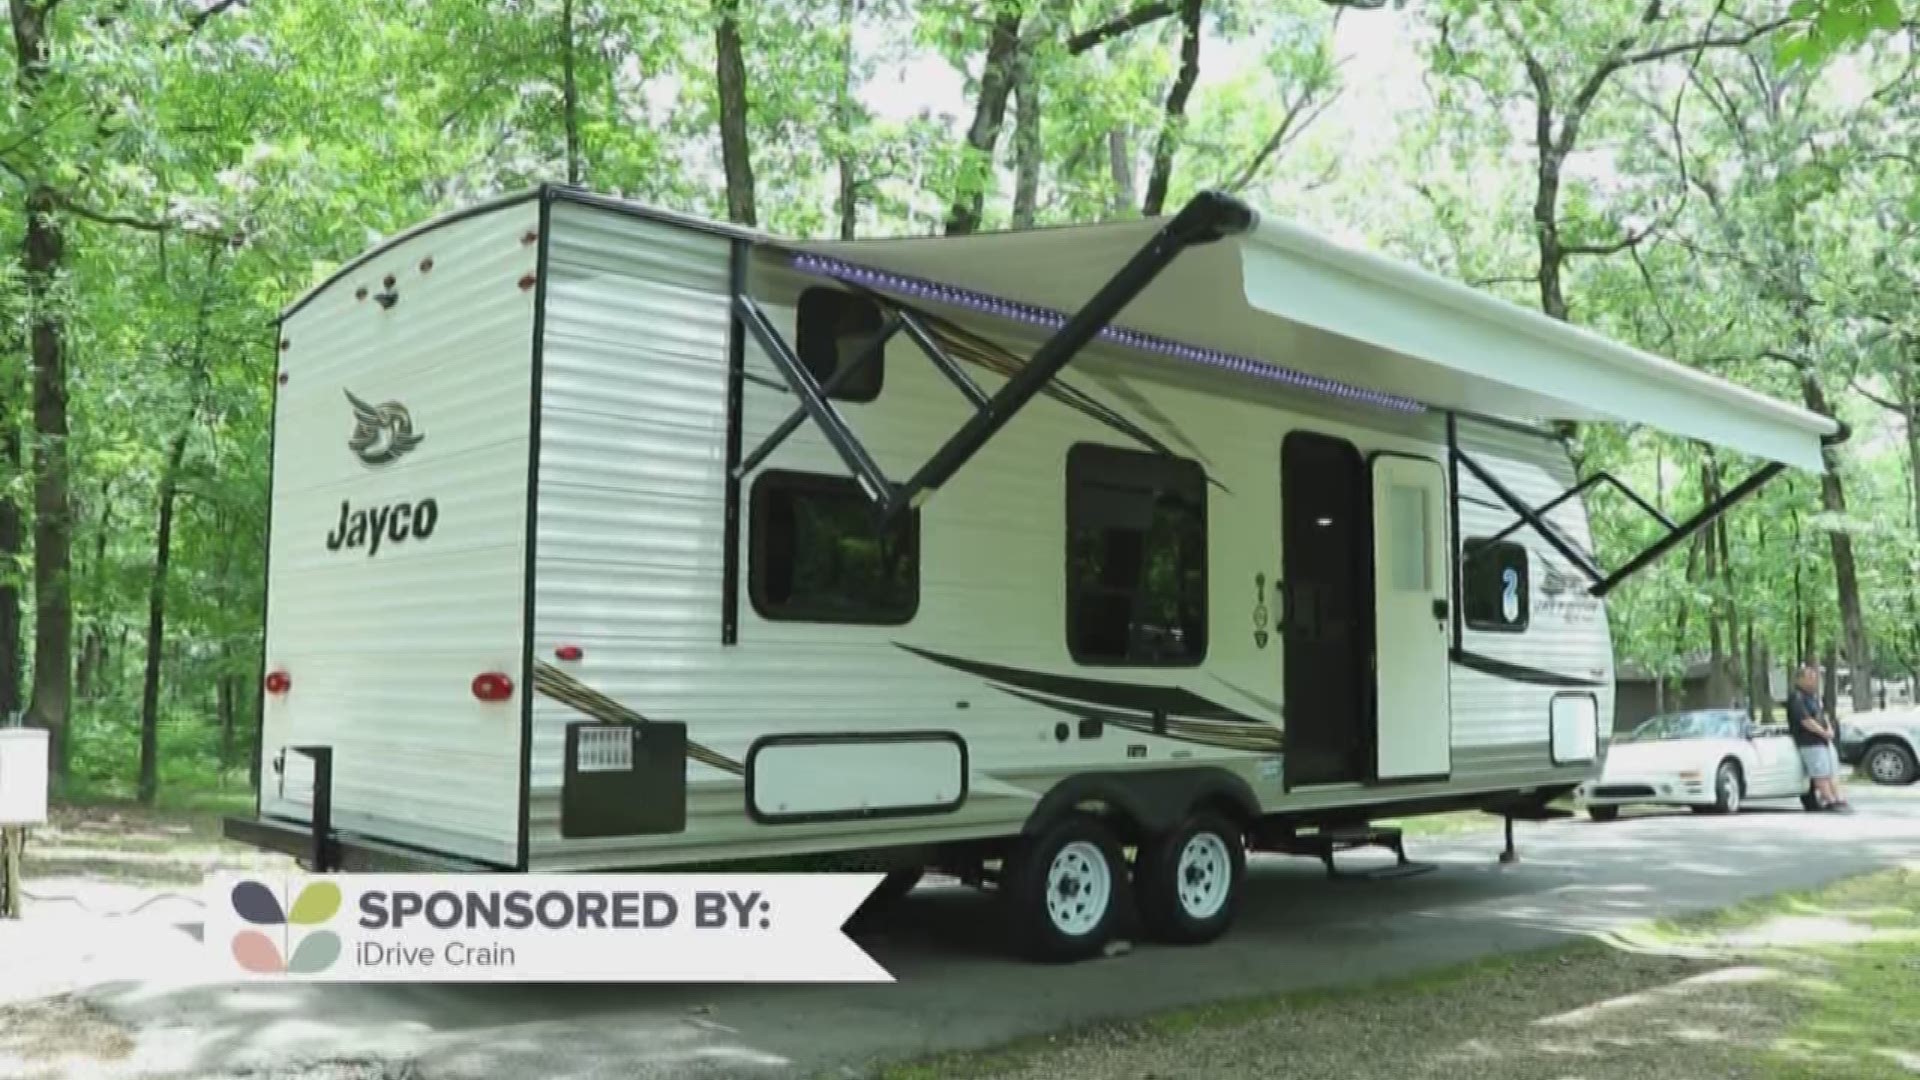 THV11's Adam Bledsoe and the iDrive Crain Team checked out another luxury Jayco Travel Trailer this week!